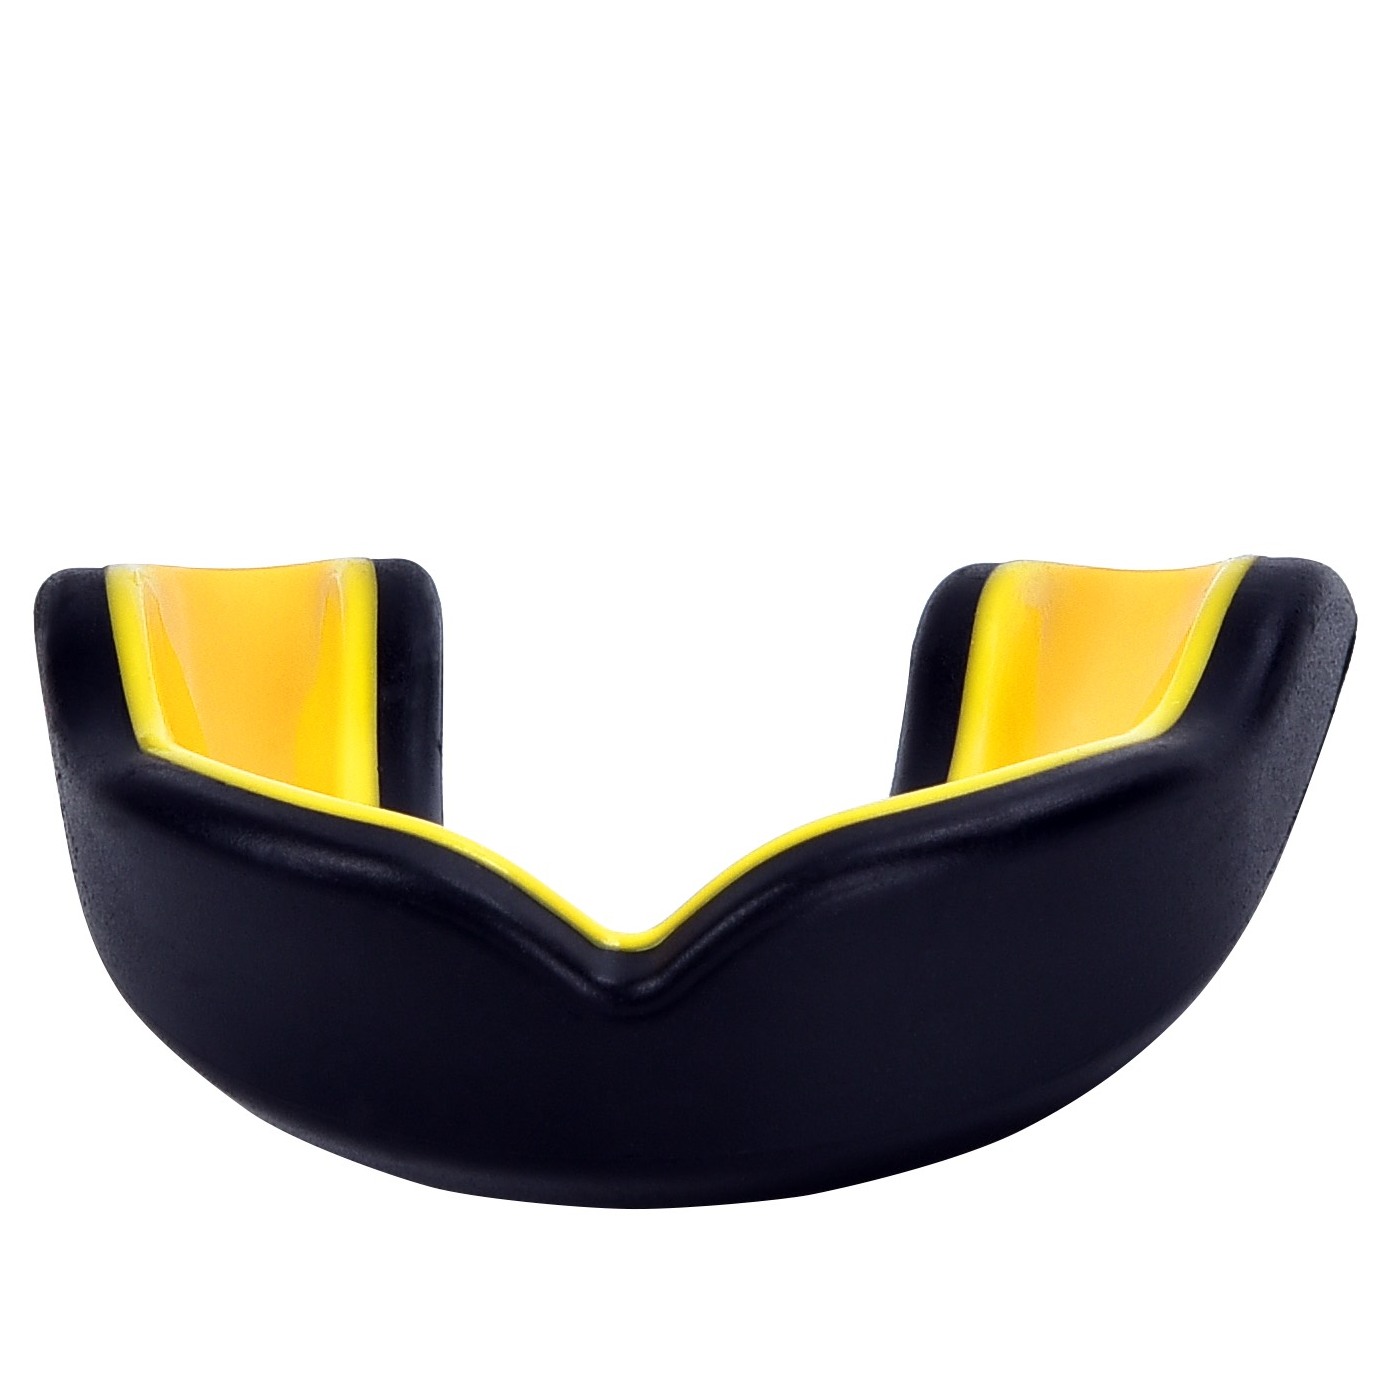 black yellow youth sports mouth guard for kids